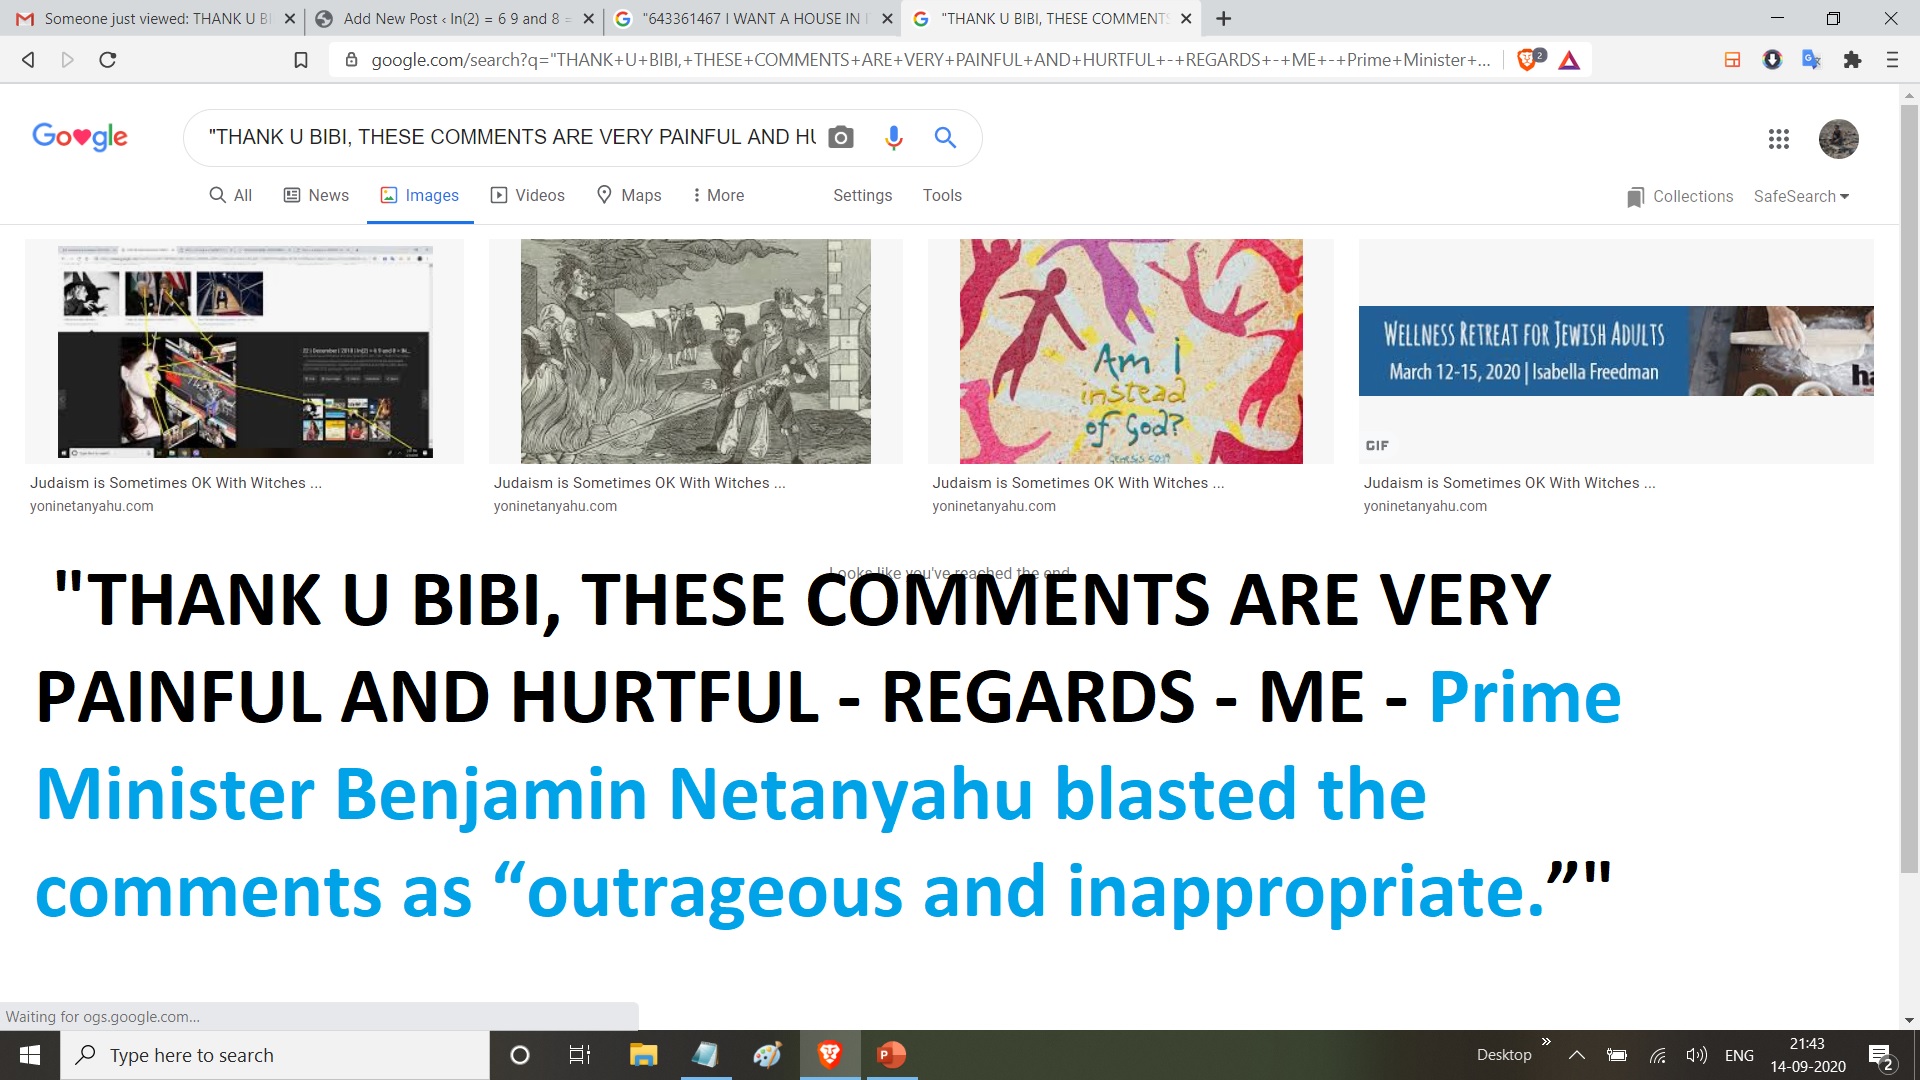 THANK U BIBI, THESE COMMENTS ARE VERY PAINFUL AND HURTFUL - REGARDS - ME - Prime Minister Benjamin Netanyahu blasted the comments as outrageous and inappropriate